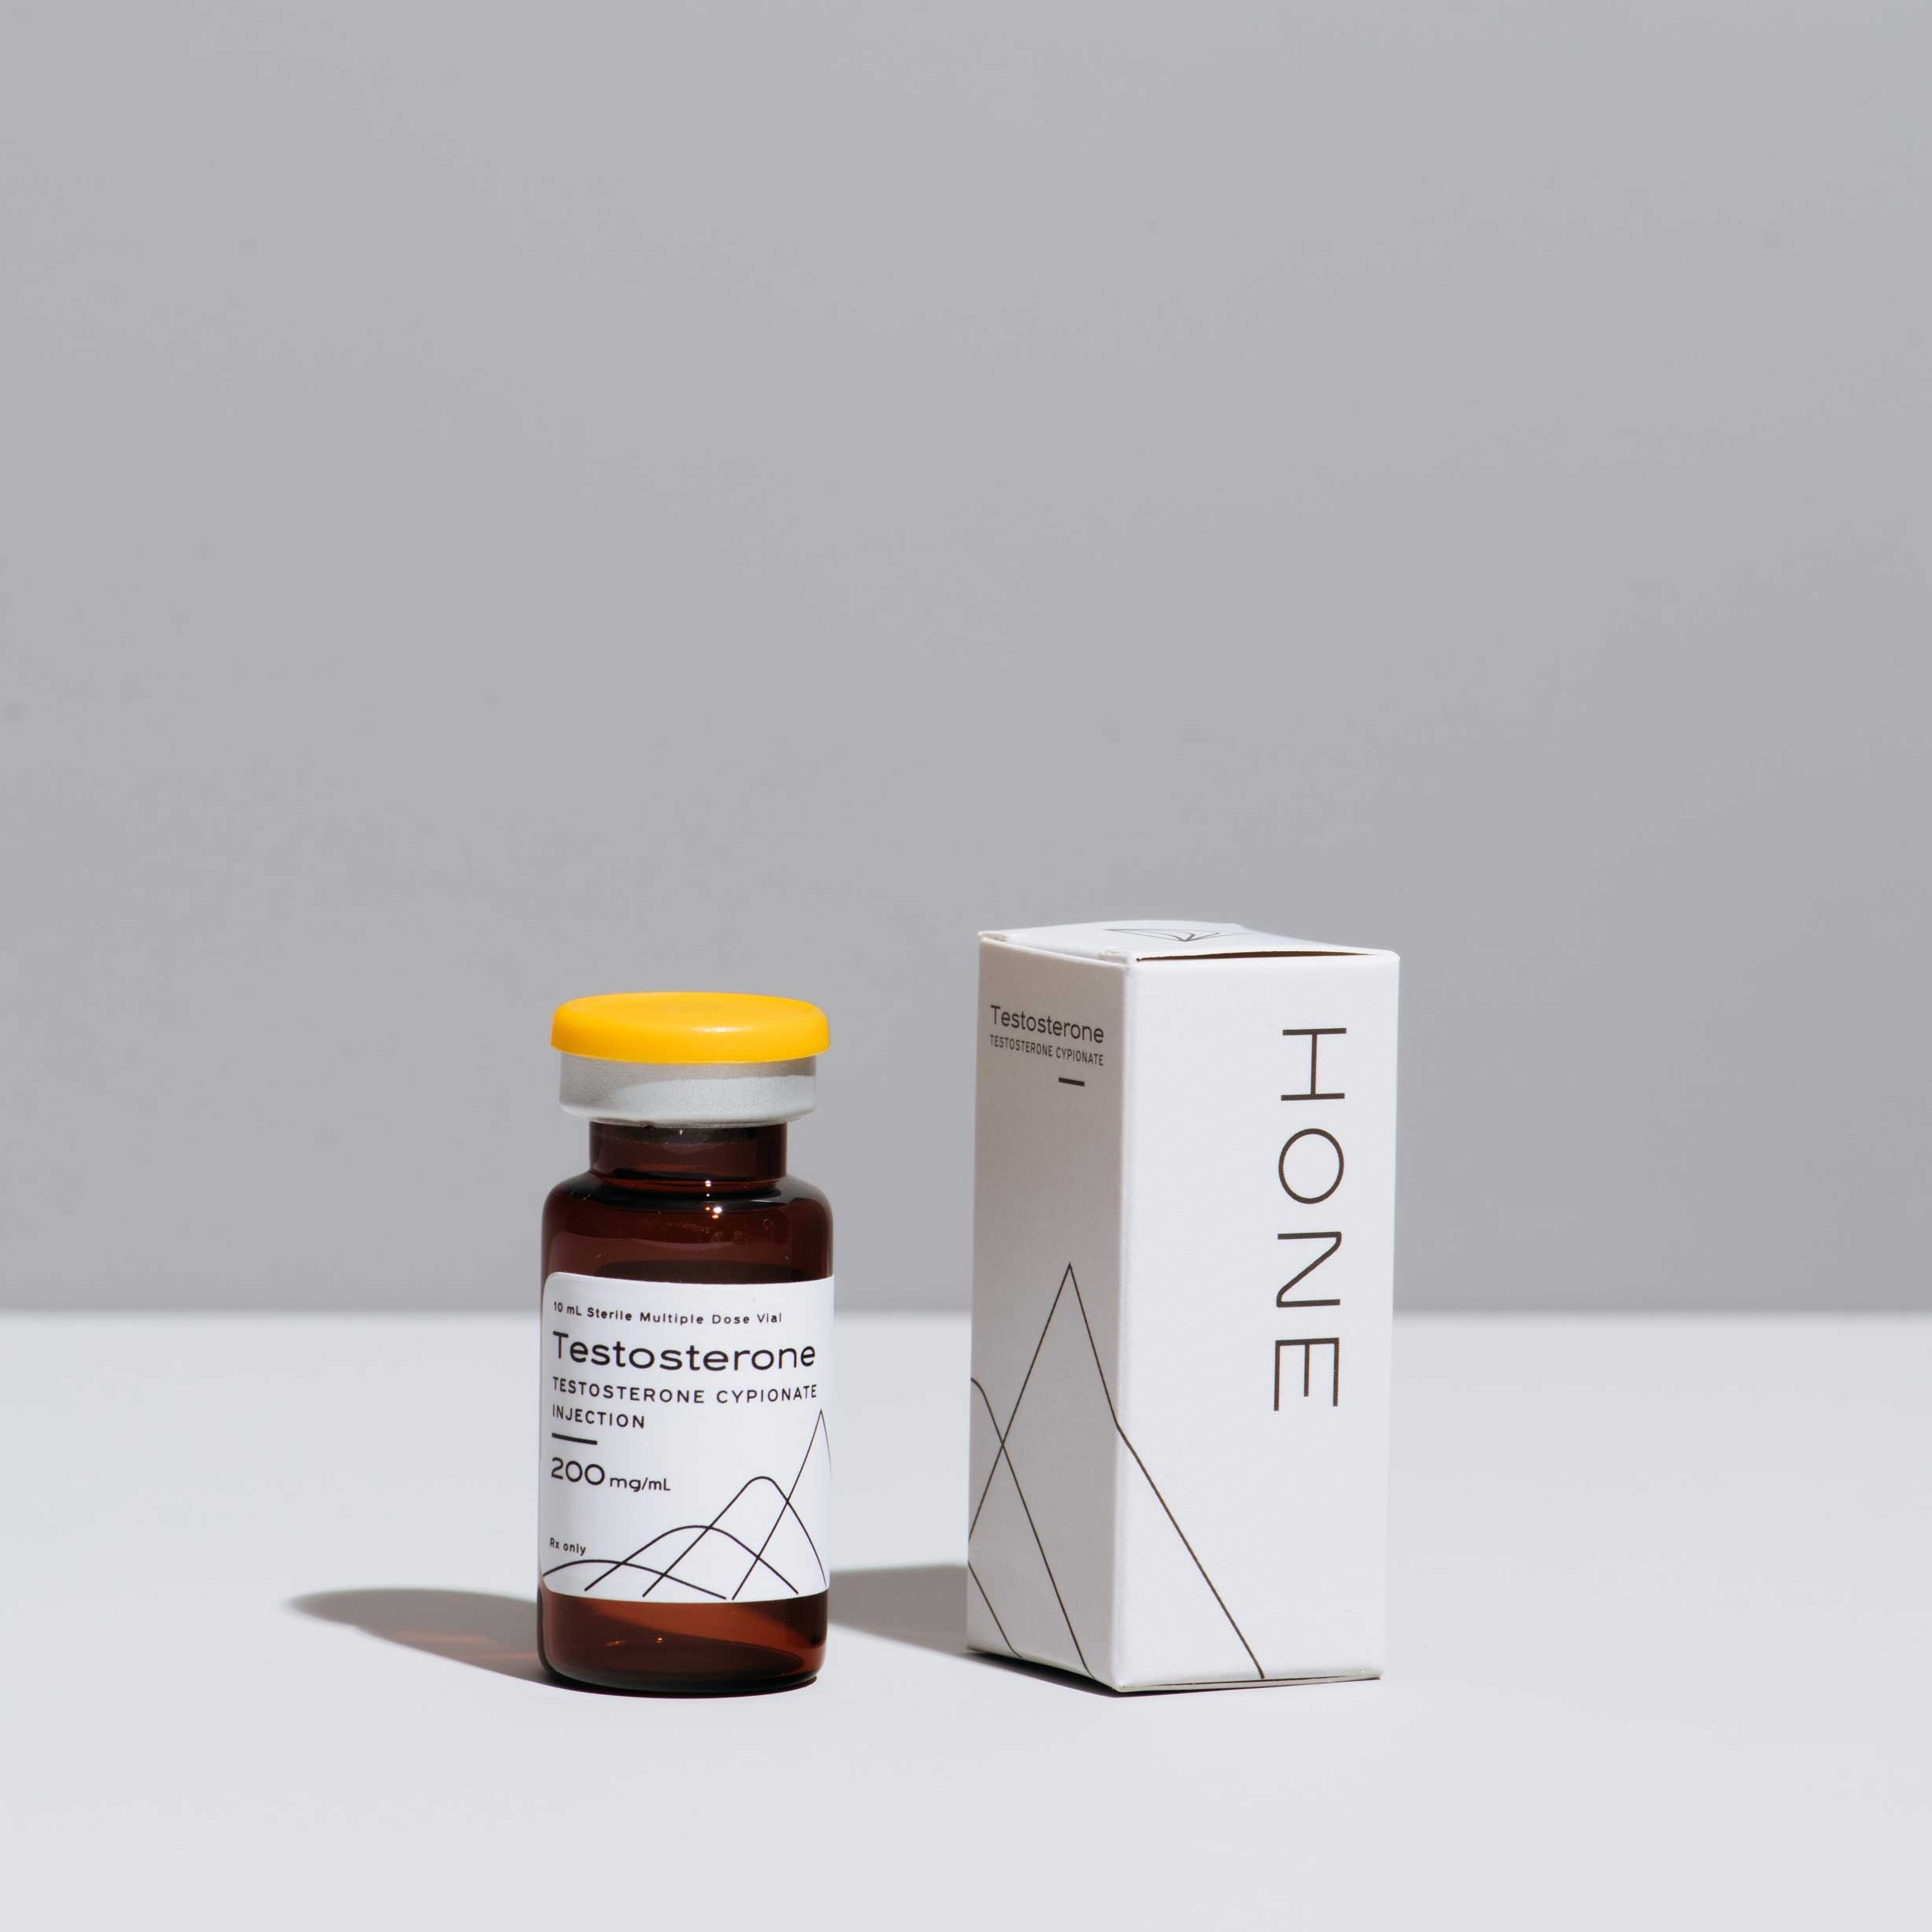 Hone Health - How to Legally Buy Testosterone Online